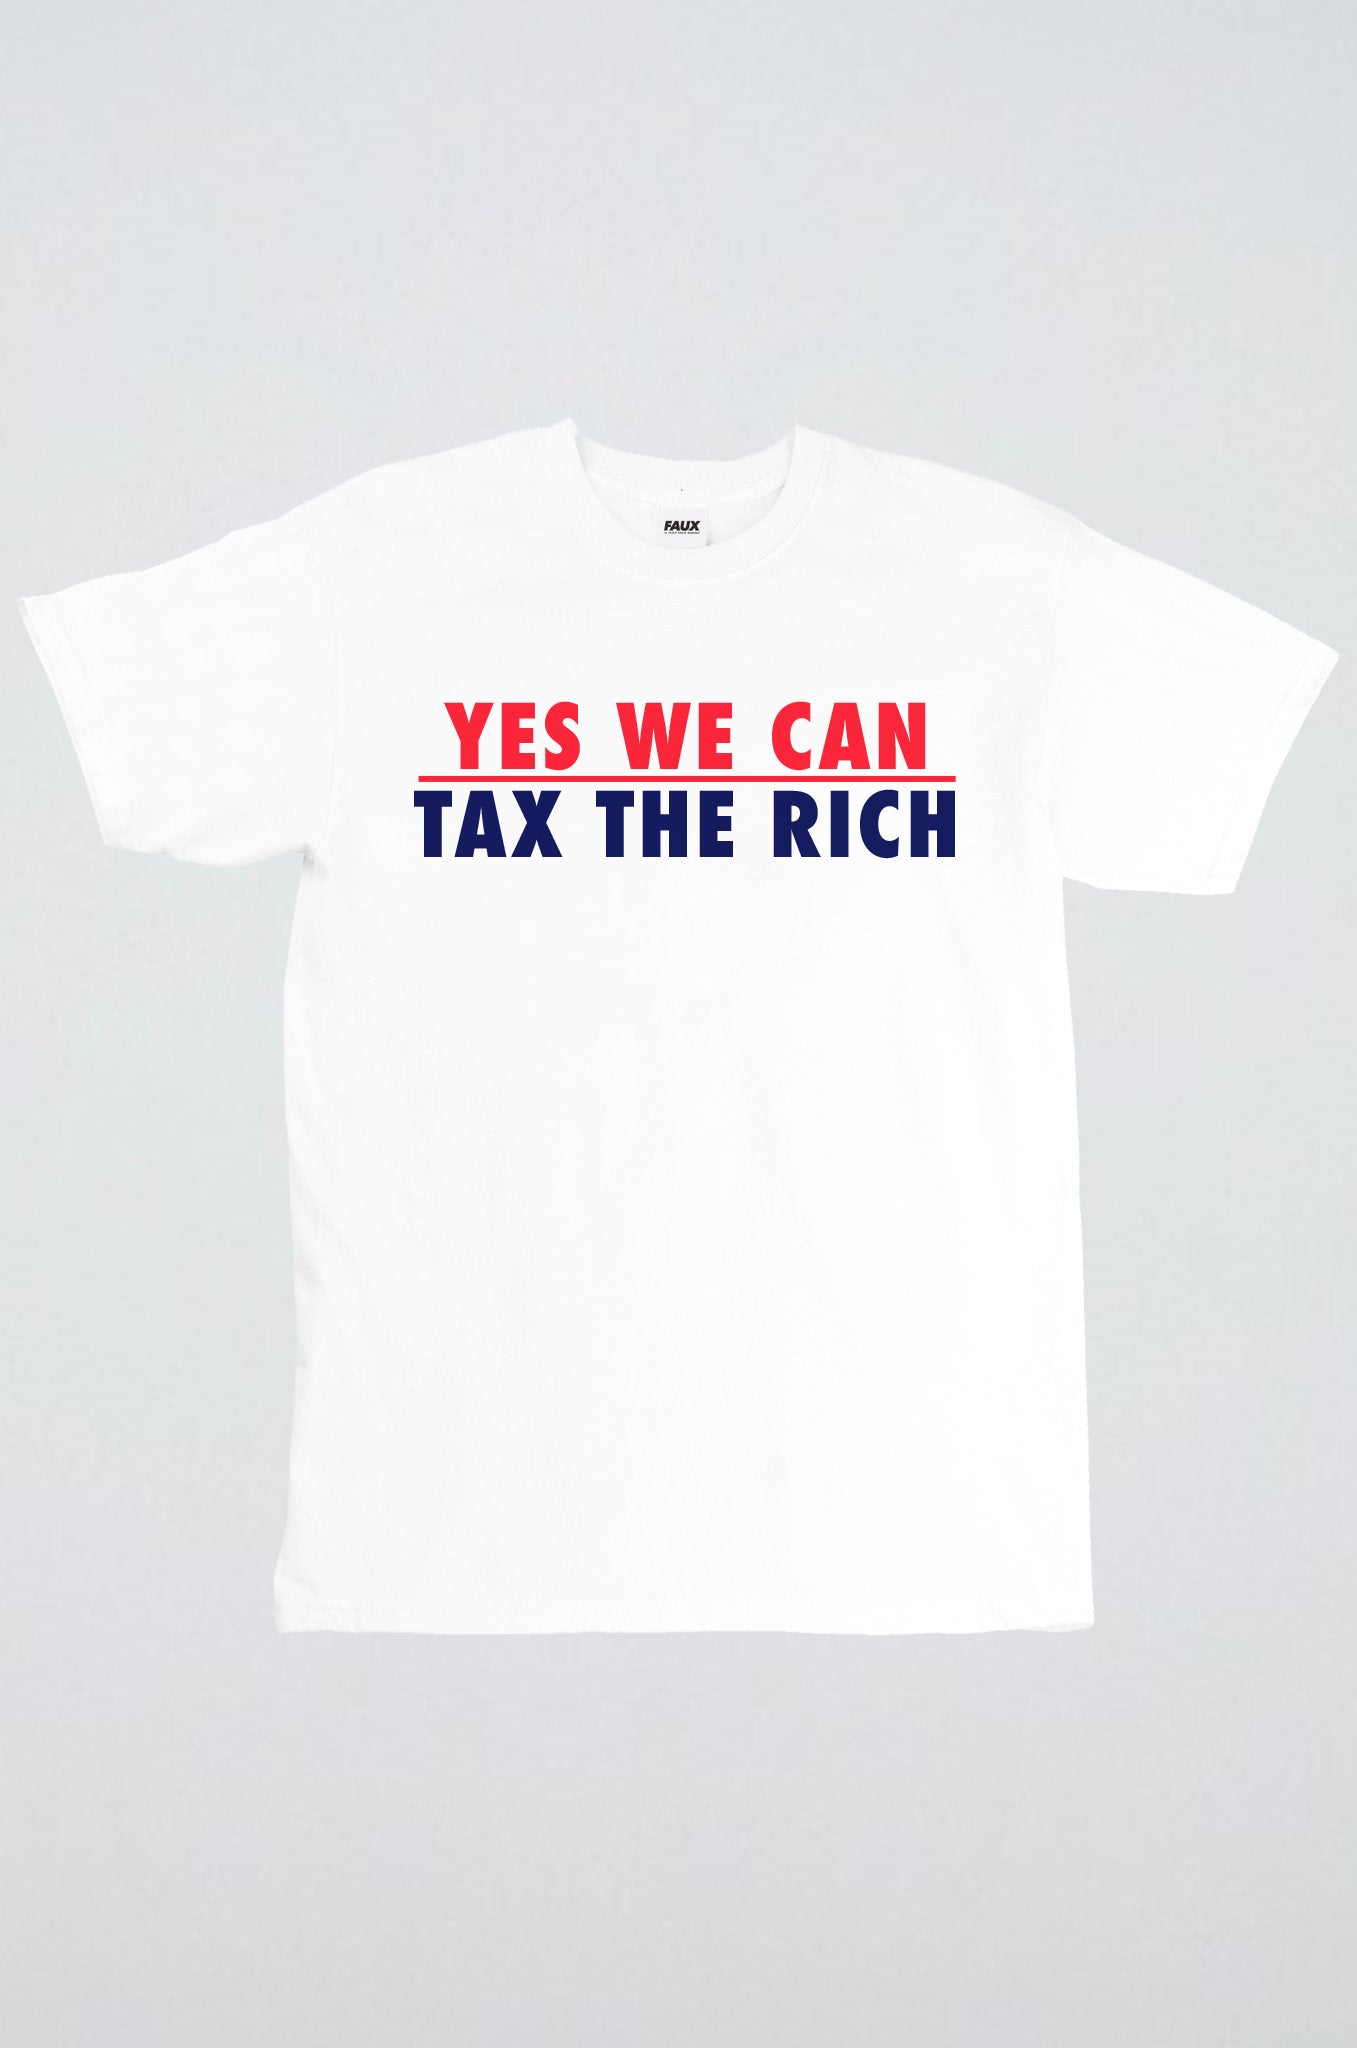 Yes we can tax the rich